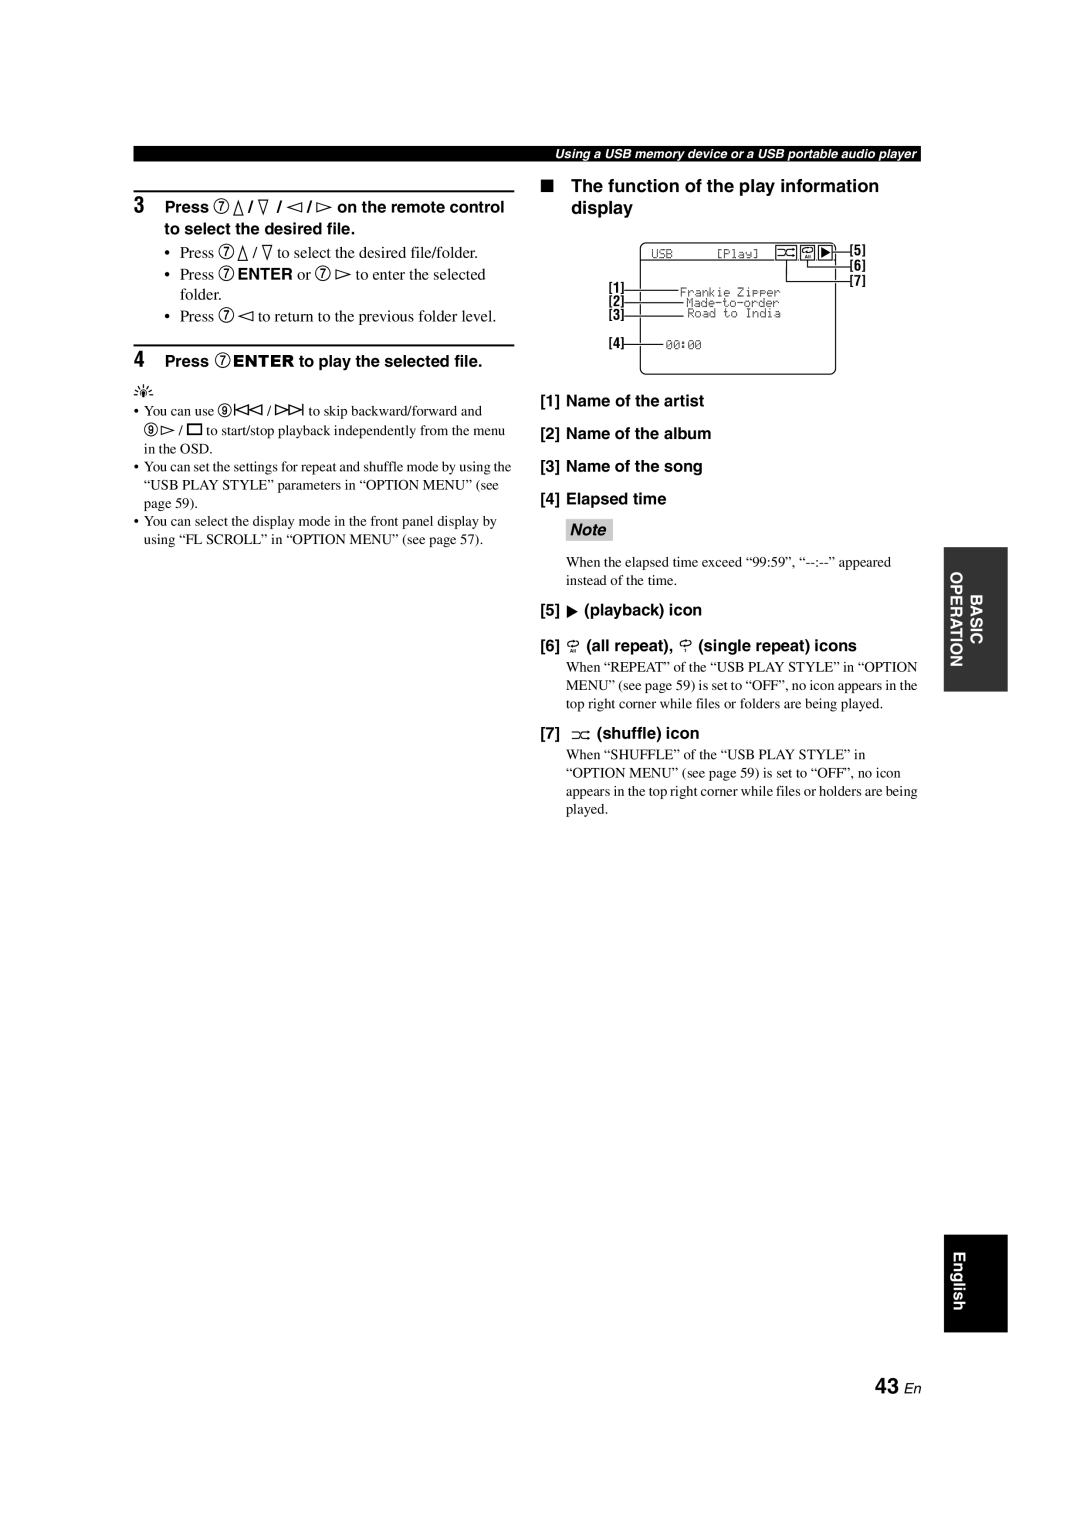 Yamaha DSP-AX463 owner manual 43 En, The function of the play information display, 4Press 7ENTER to play the selected file 